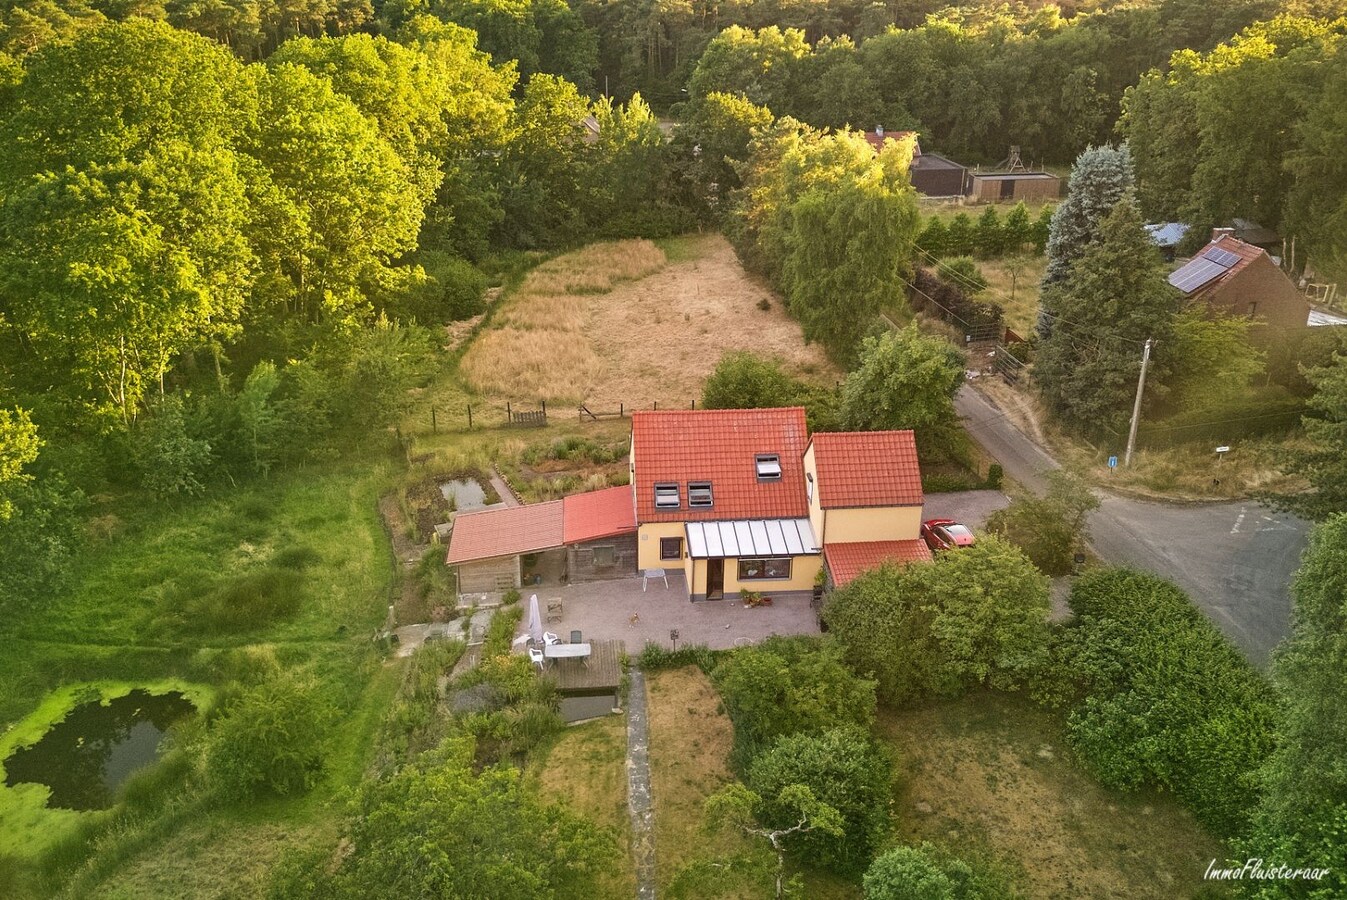 Cozy home in the middle of greenery on a plot of approximately 1.16 hectares. 